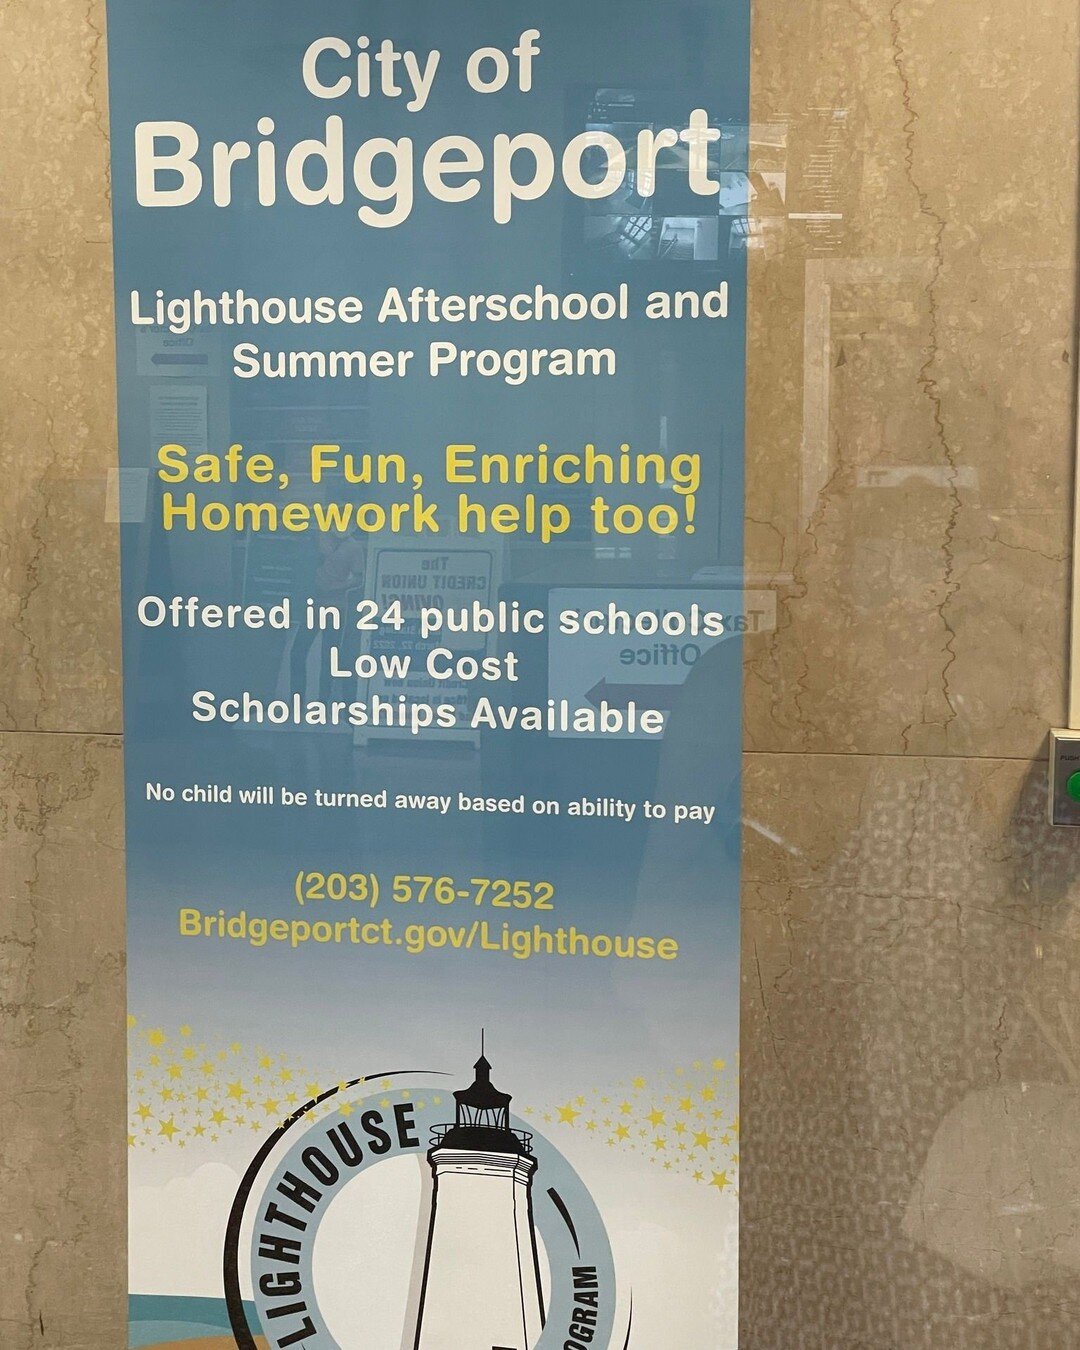 We love providing books to The City of Bridgeport's Lighthouse Program, which provides many summer and after school programs for students.